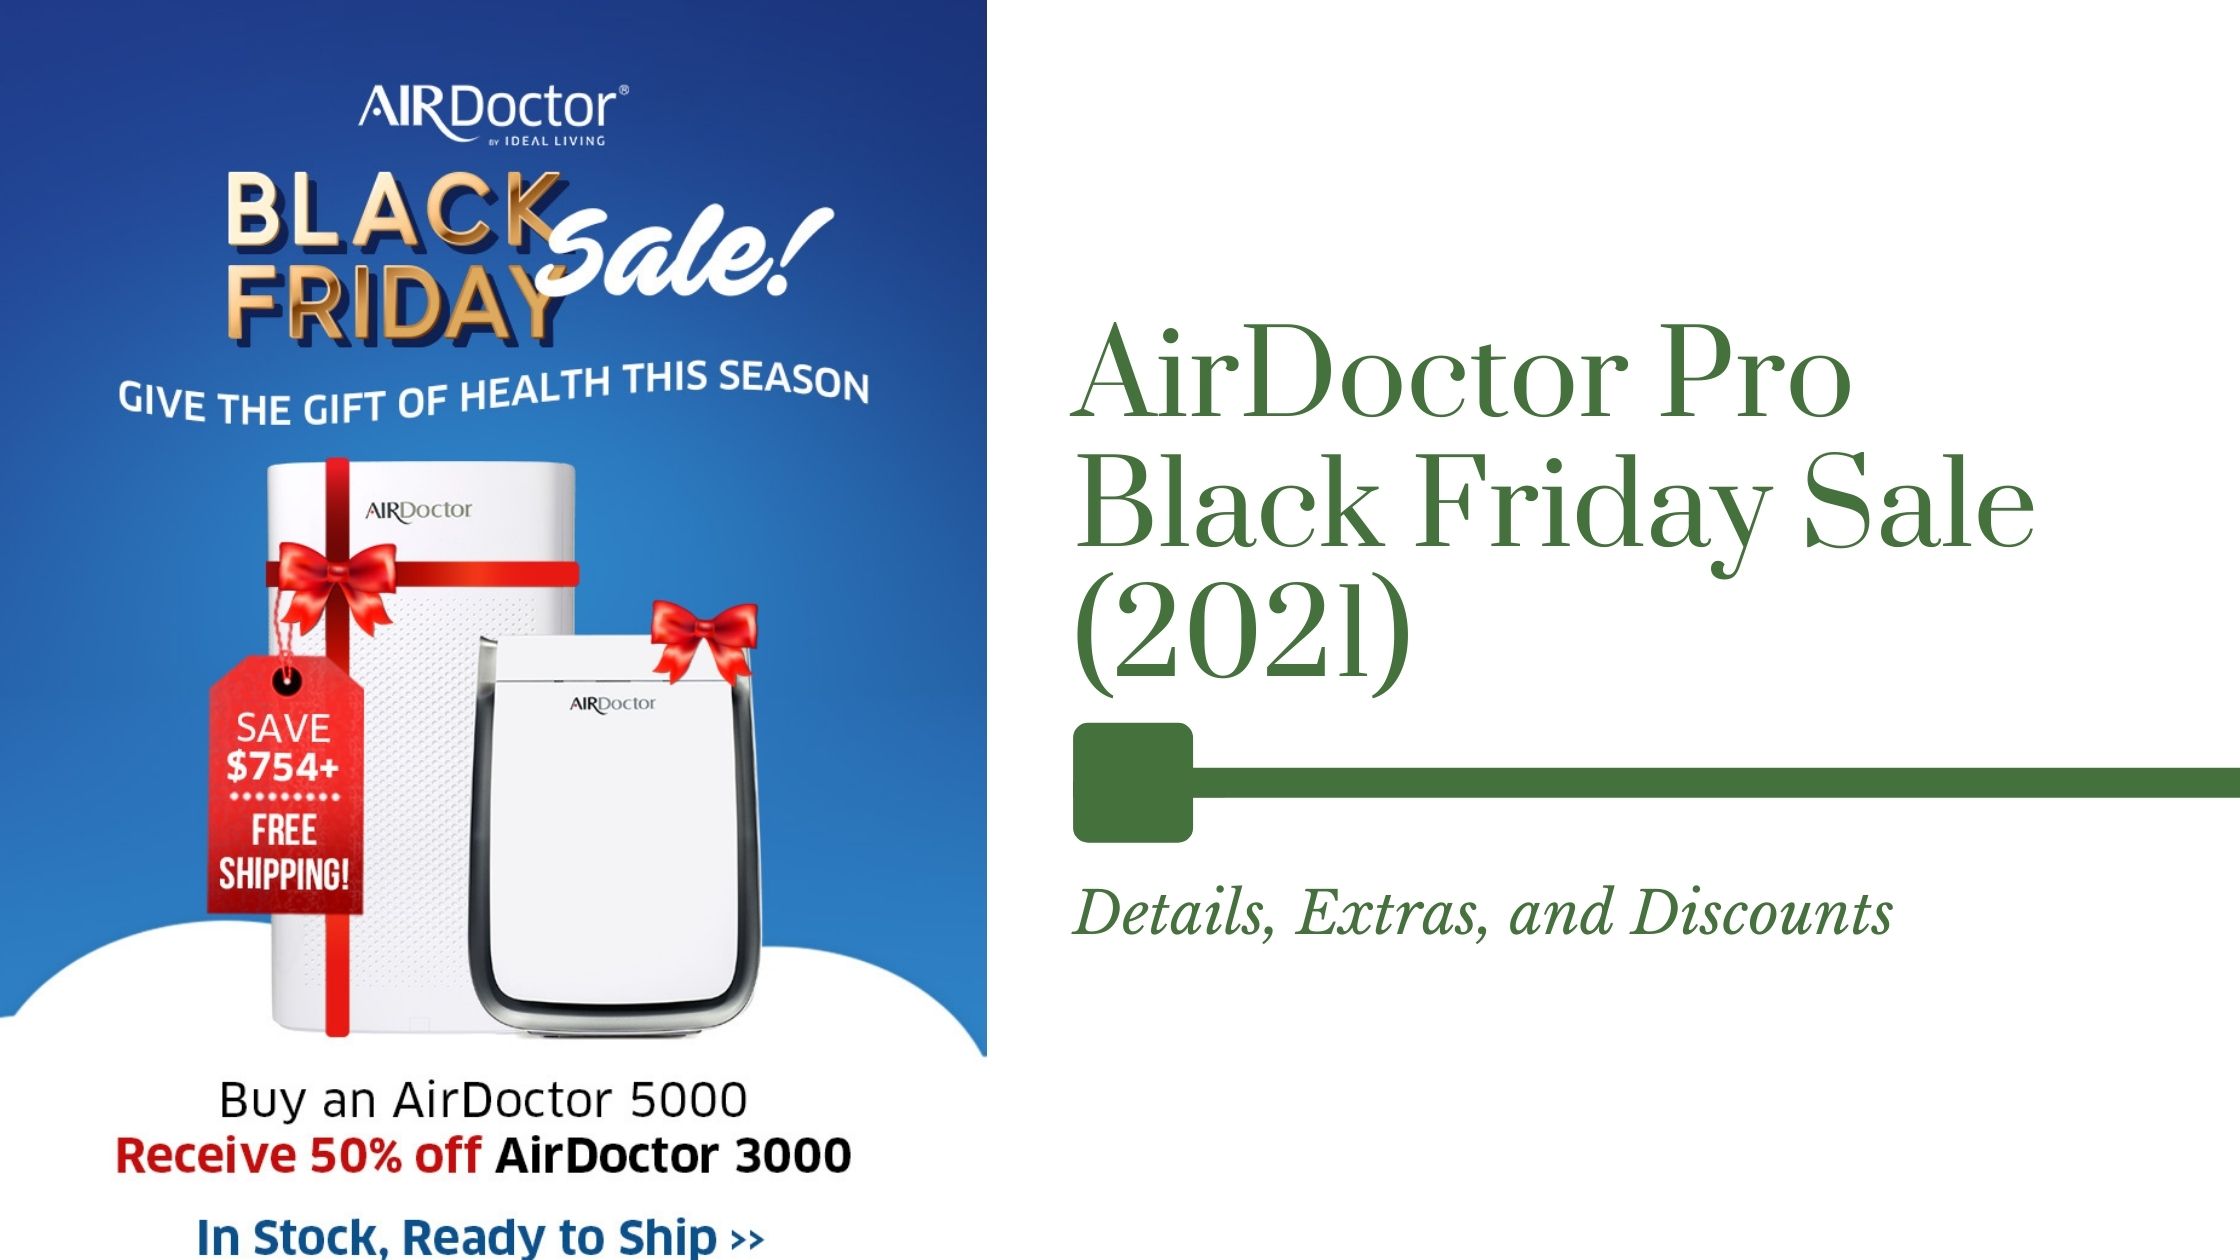 AirDoctor Pro Air Filter Black Friday sale information 2021